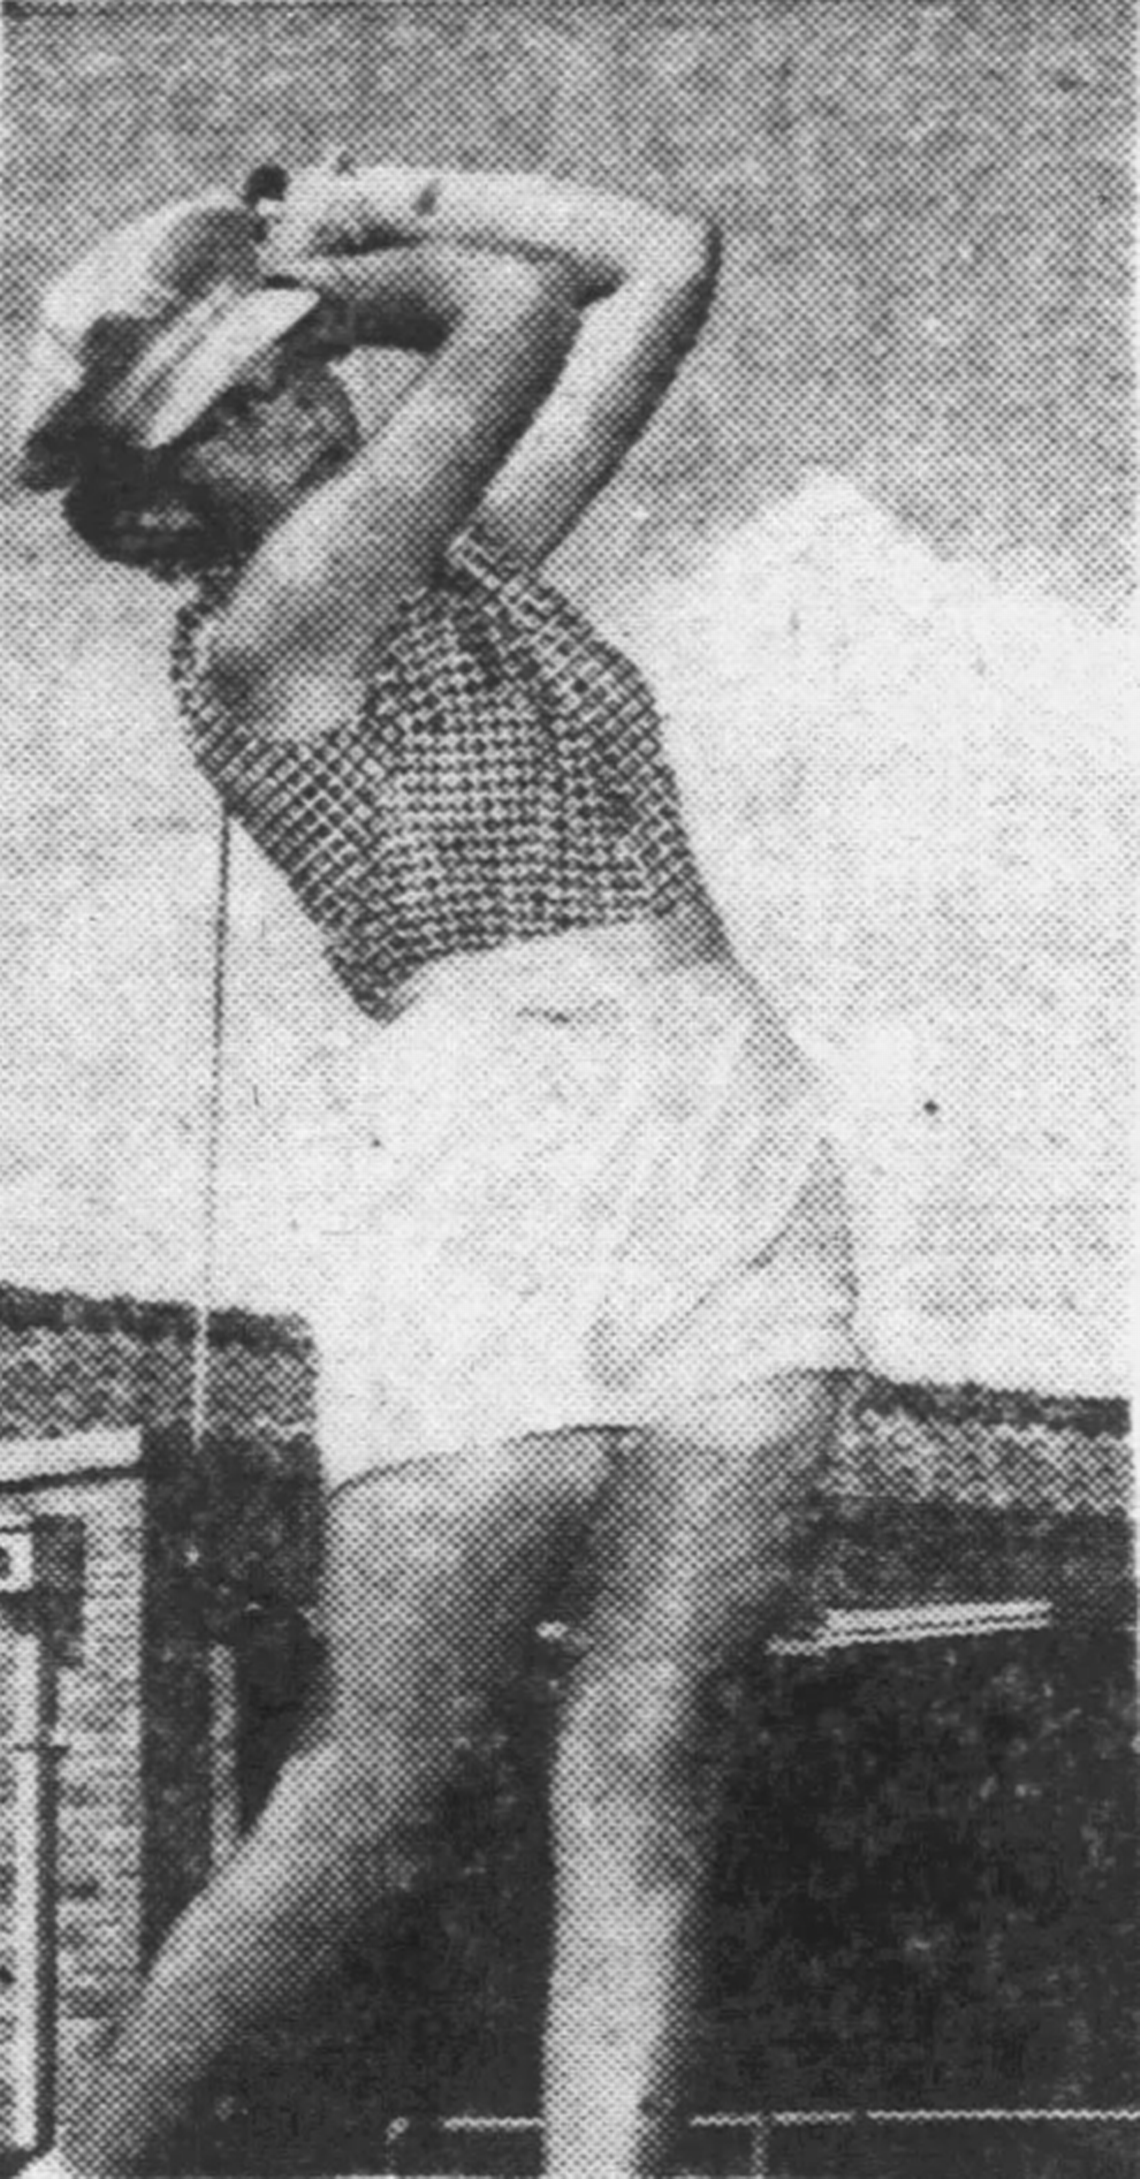 Judy Bell poses after a tee shot in a 1954 tournament in Wichita. She later became the first woman to become the President of the USGA.